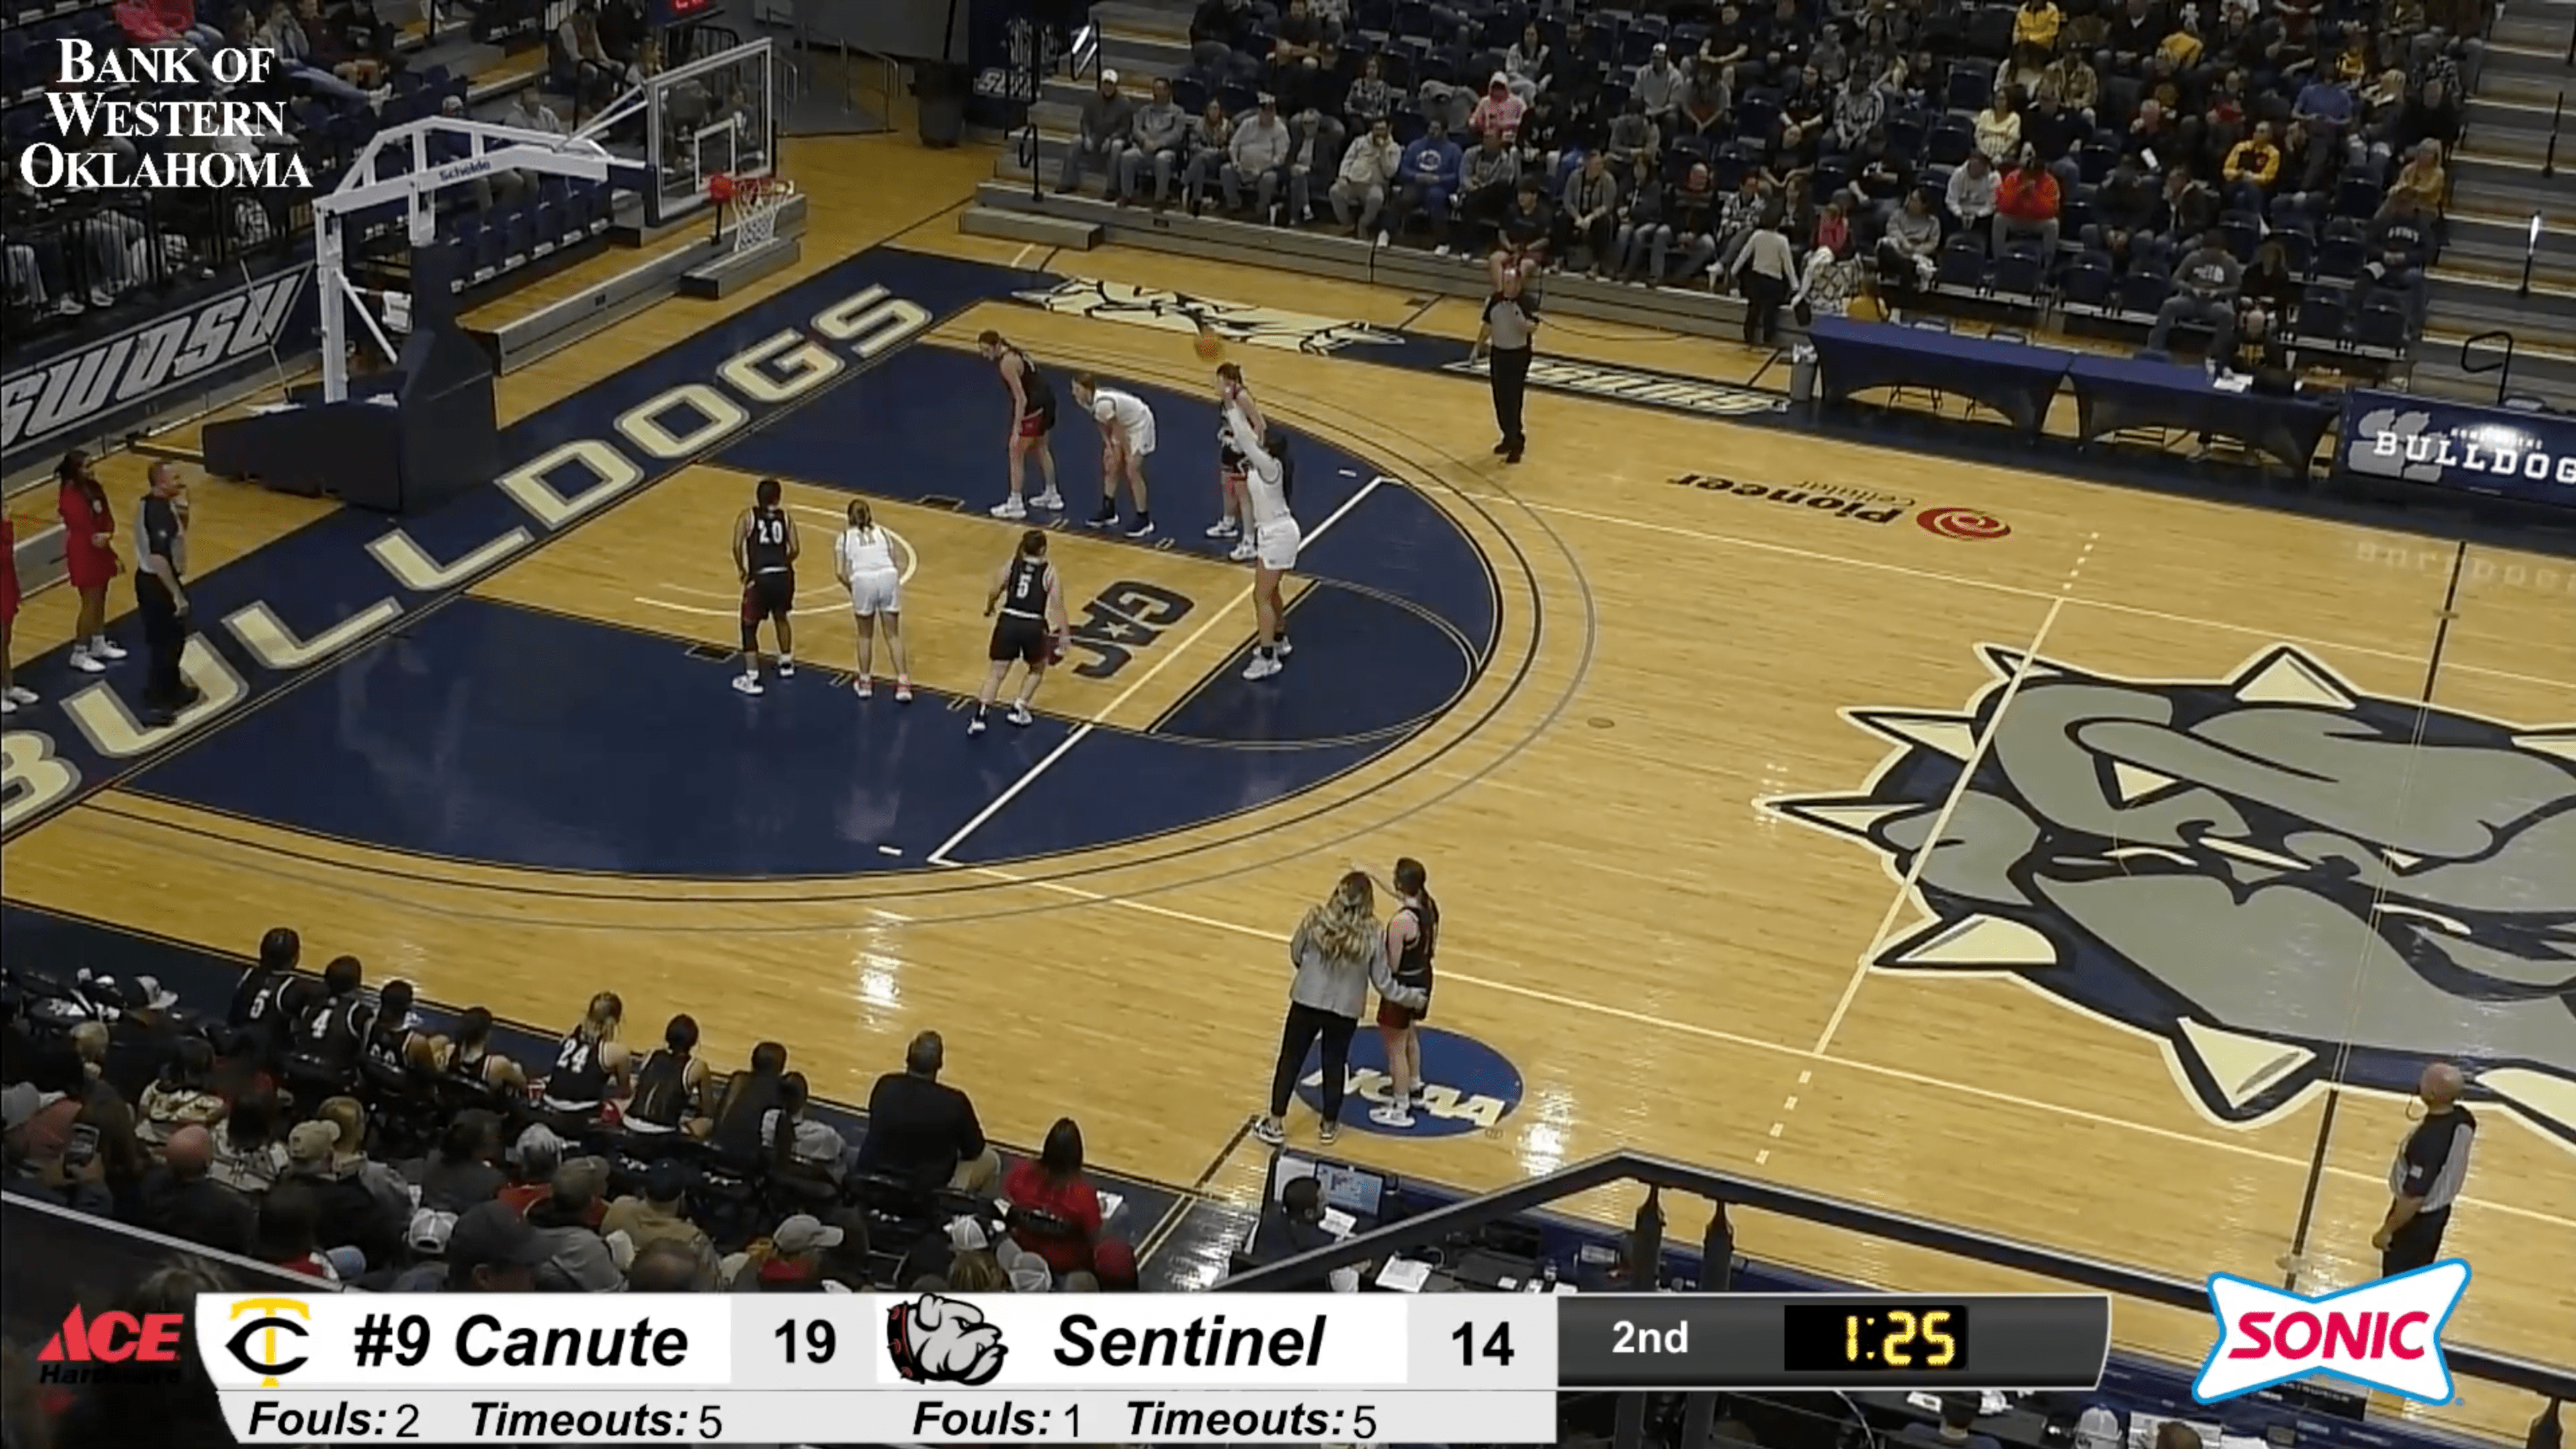 ParagonTV screenshot featuring the Canute vs Sentinel girls' basketball game.